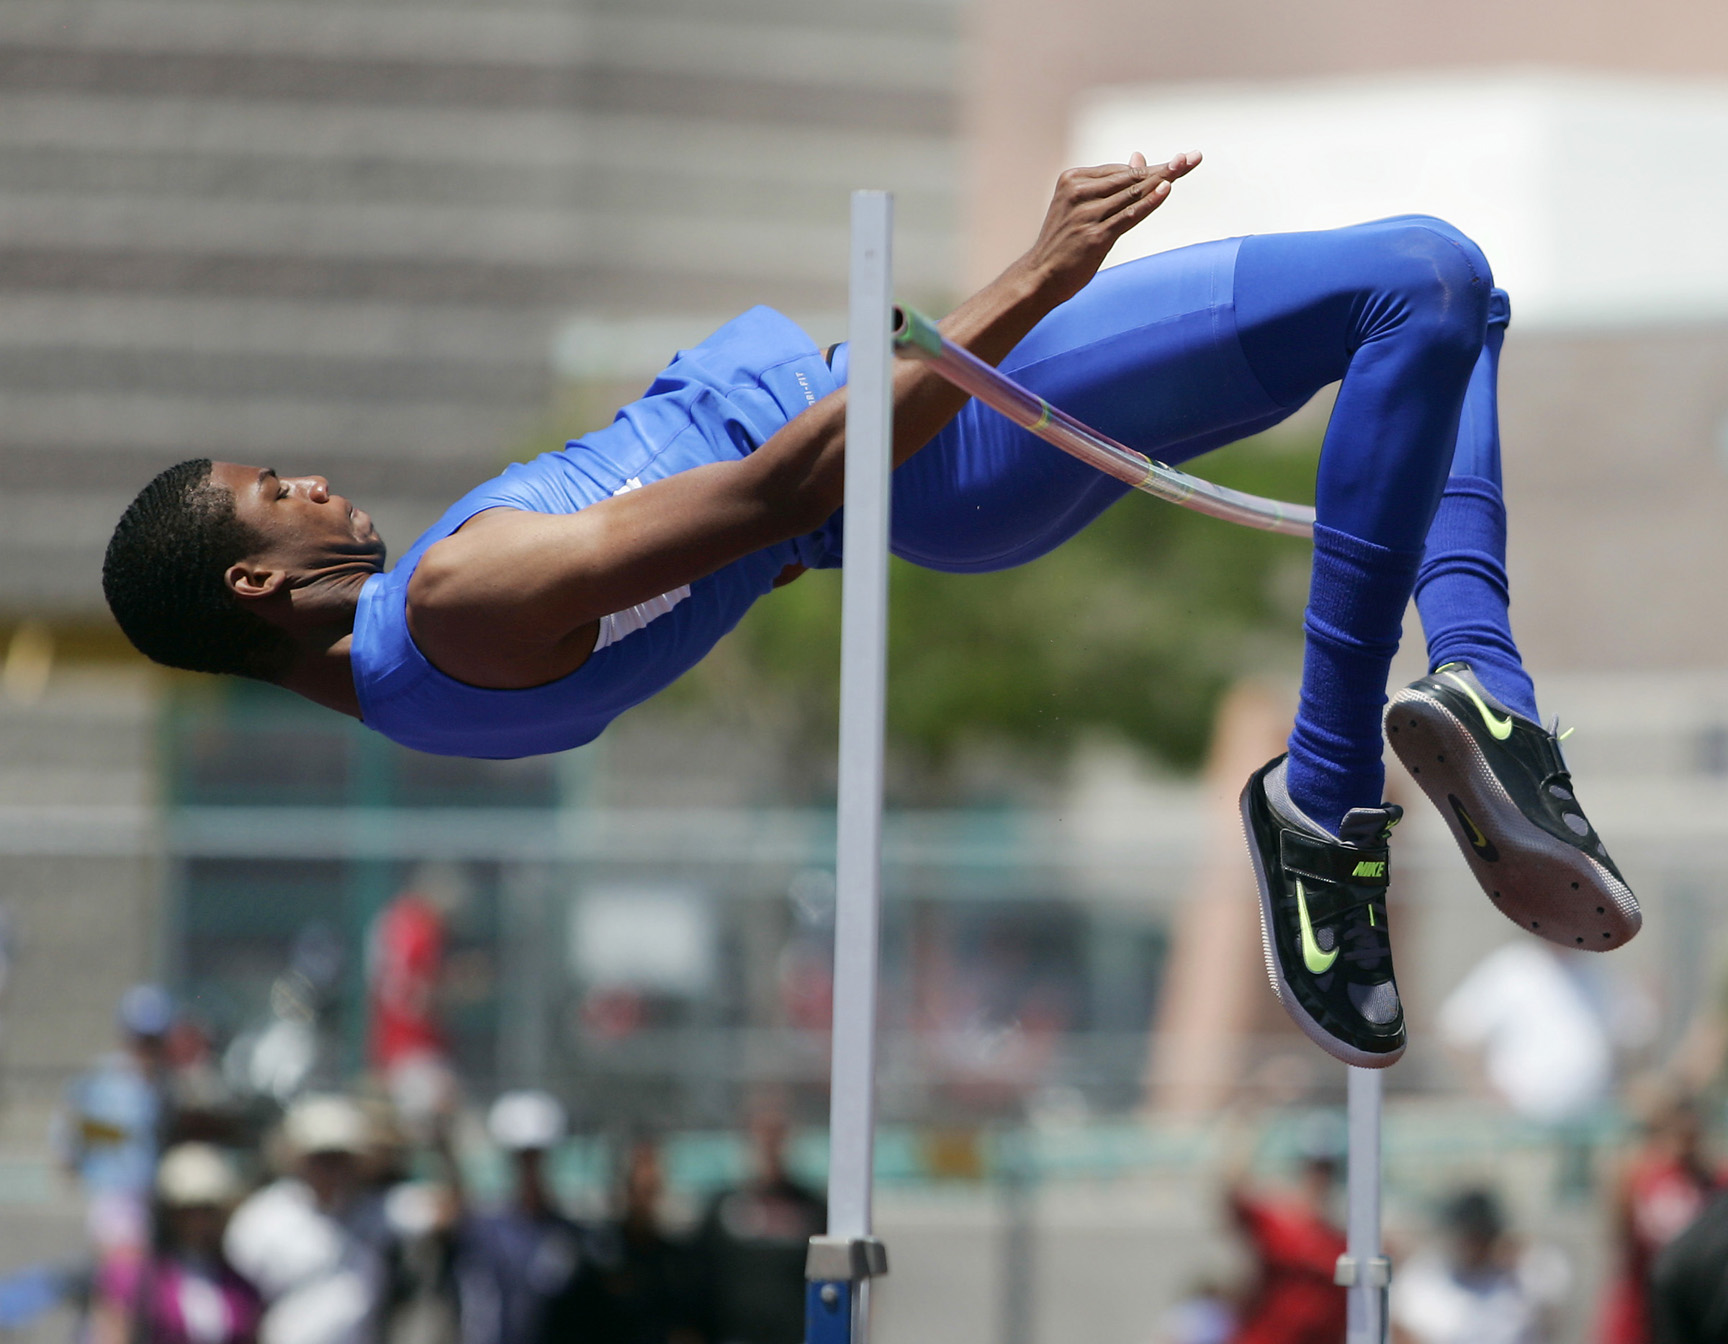 Bishop Gorman’s junior Randall Cunningham successfully completes the 7’ 3 ¼” high jump breaking national record at the state track meet hosted by Silverado High School Saturday, May 18, 2013, in Las Vegas.